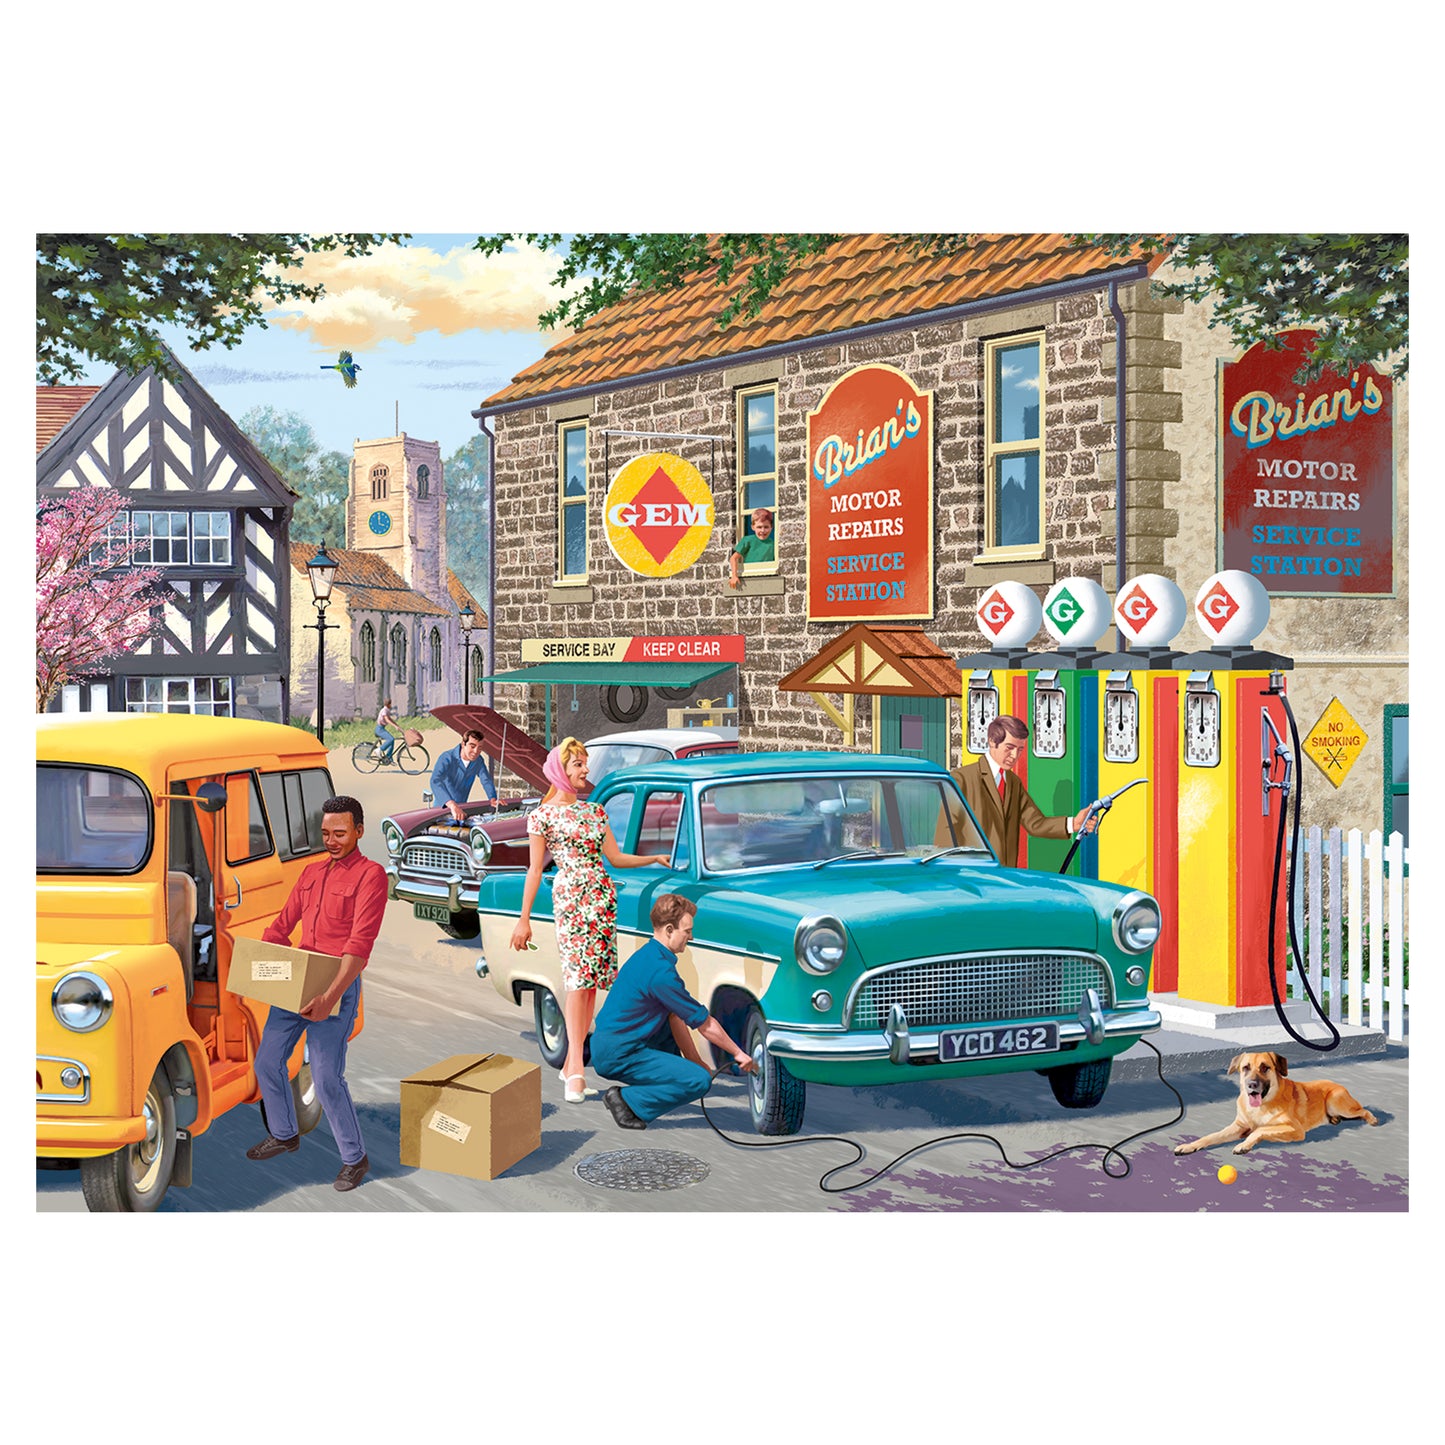 Falcon - The Petrol Station (1000 pieces) - product image - Jumboplay.com